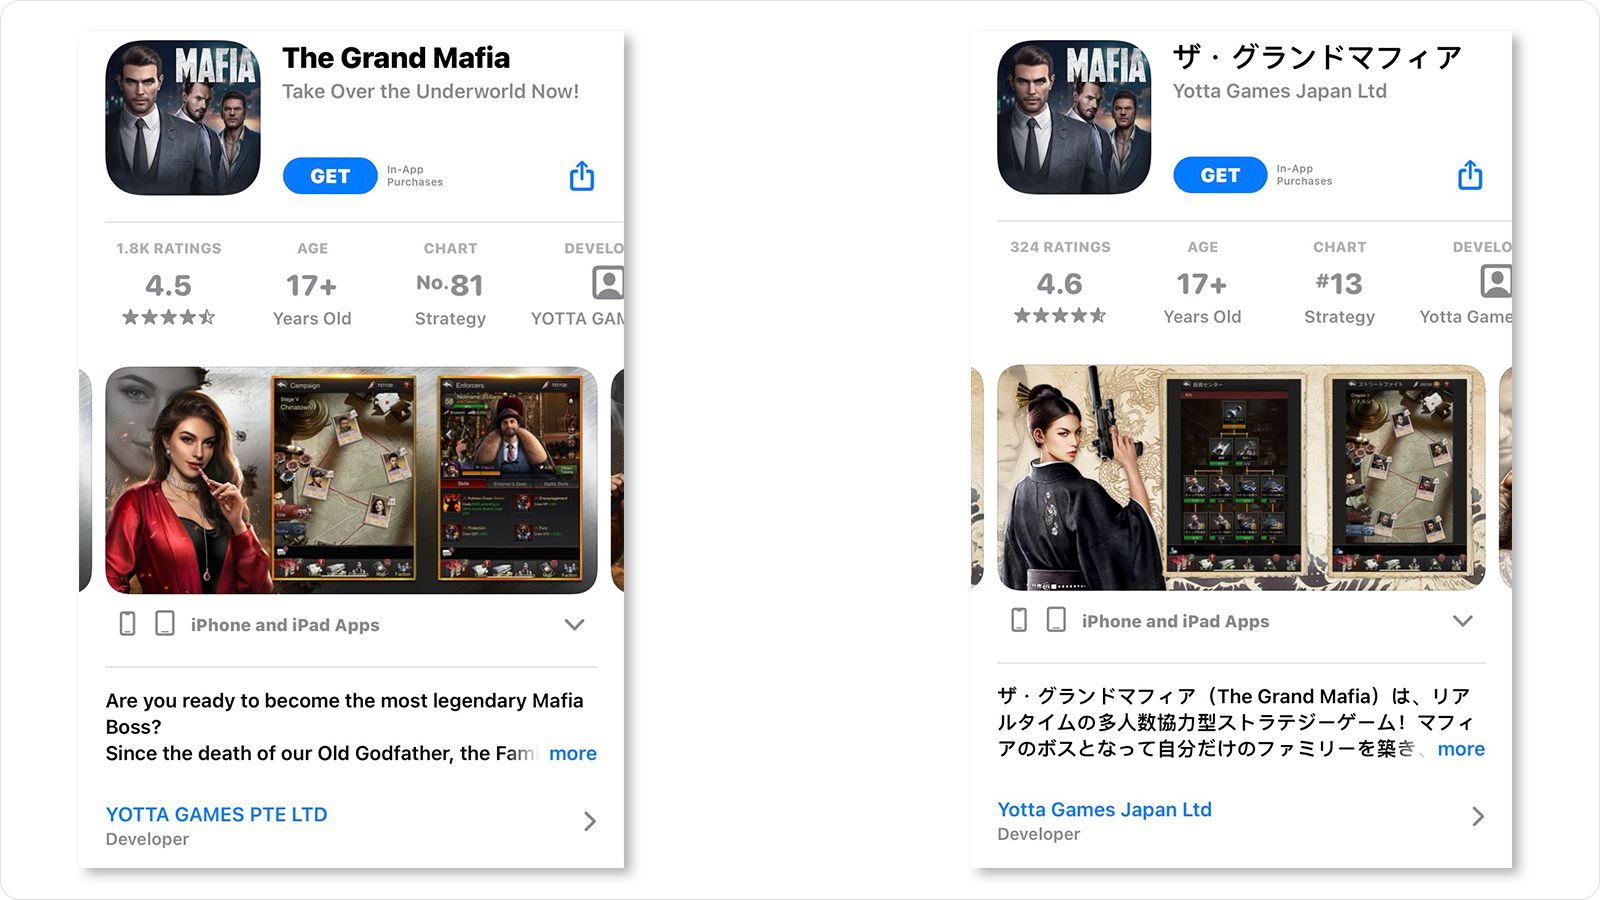 App page for the USA and Japan